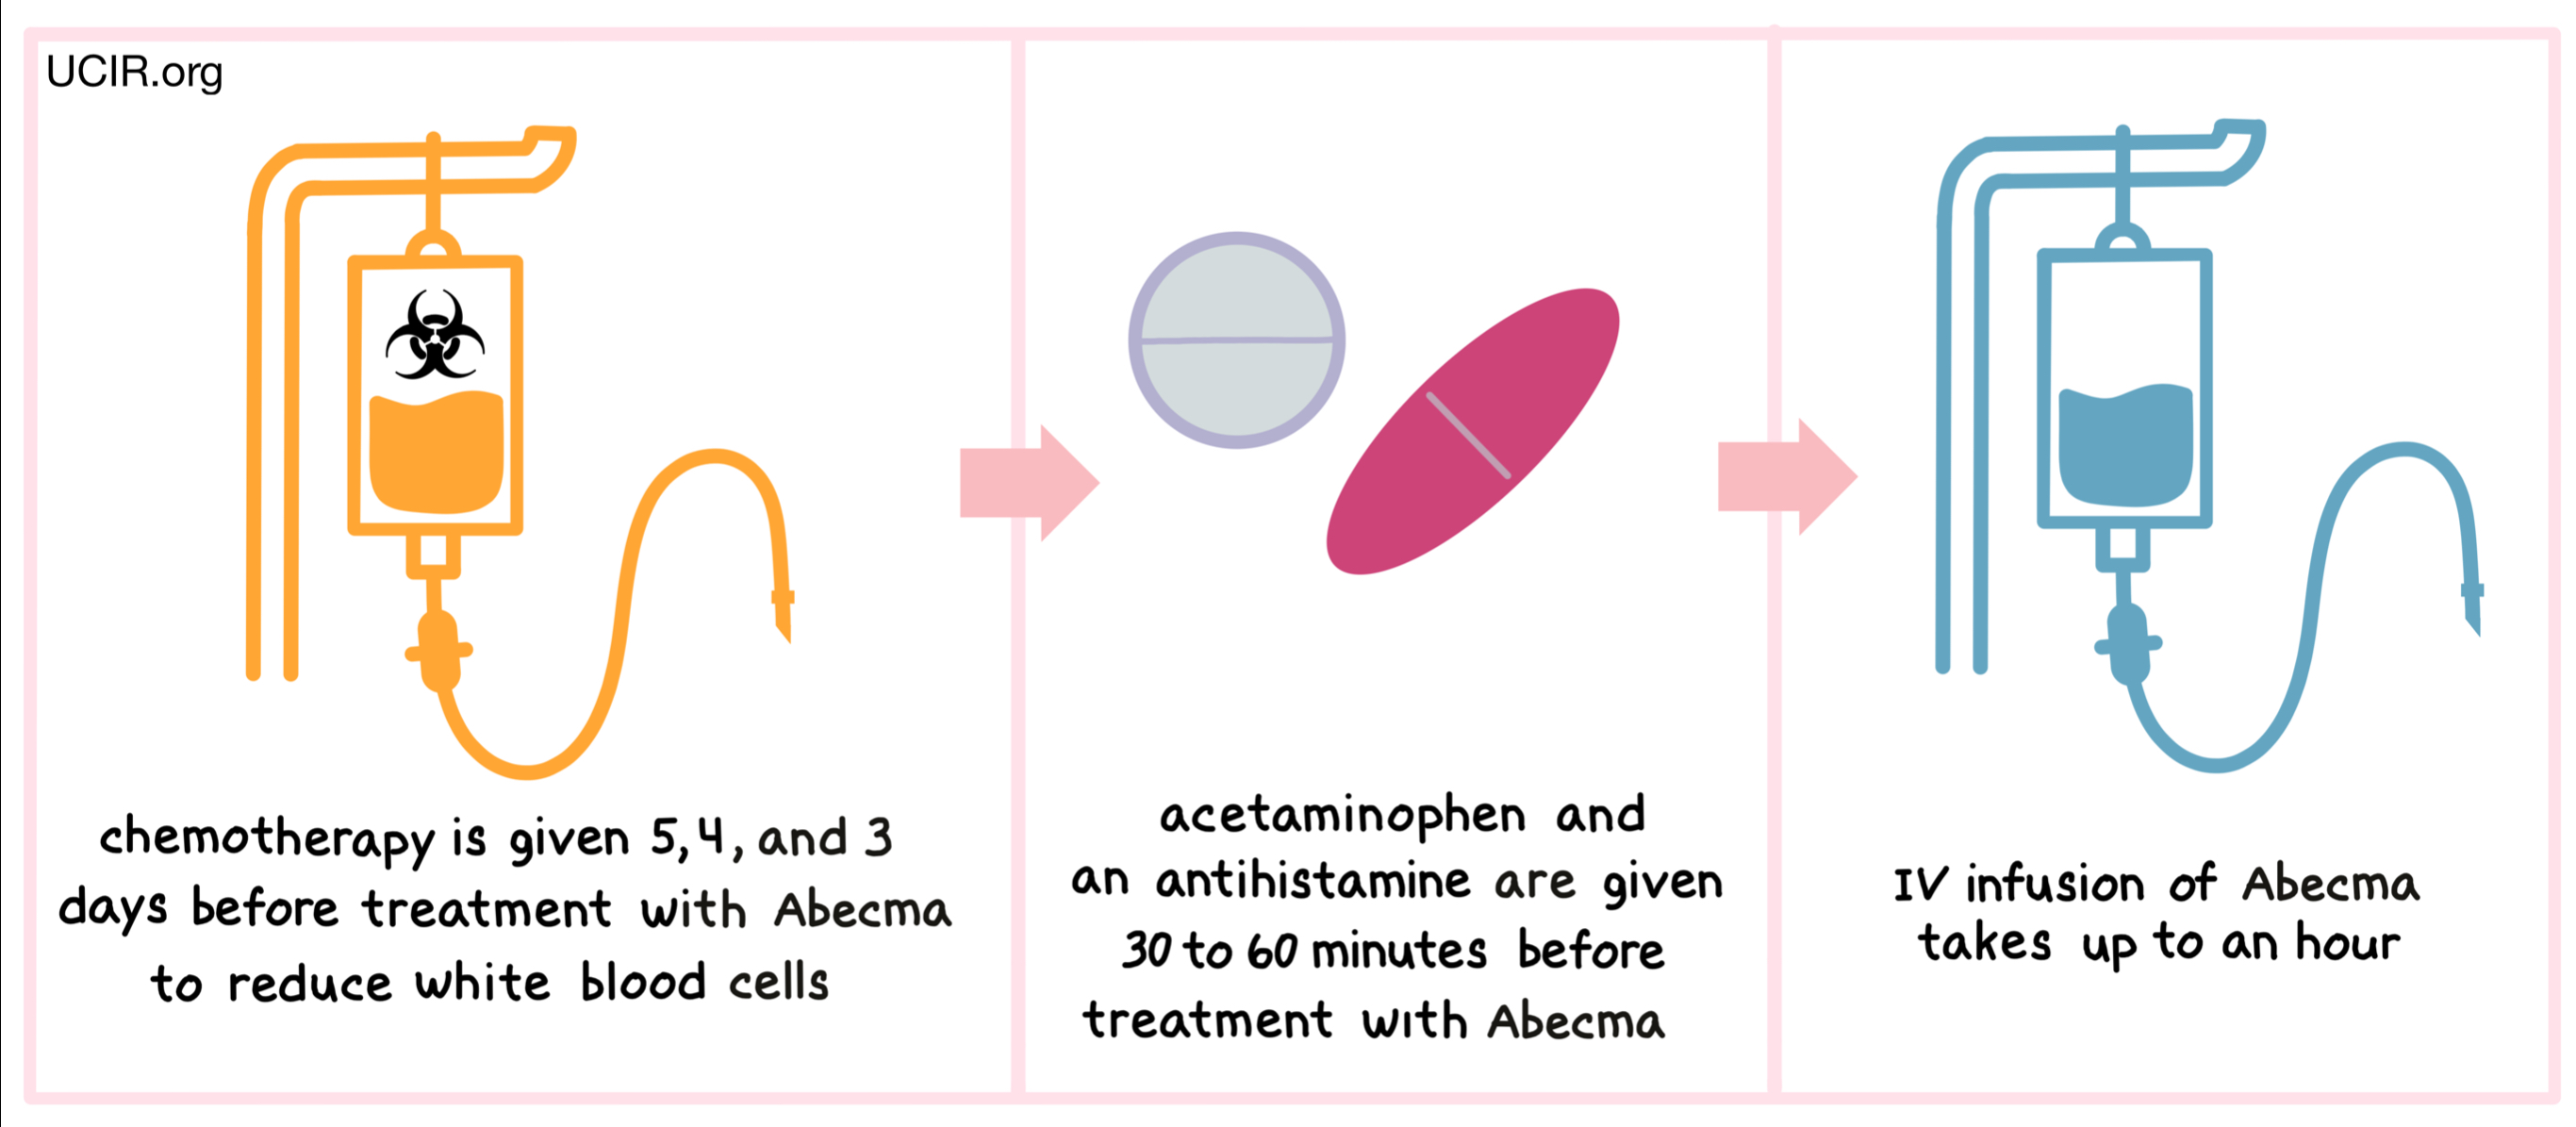 Timeline showing how Abecma is administered